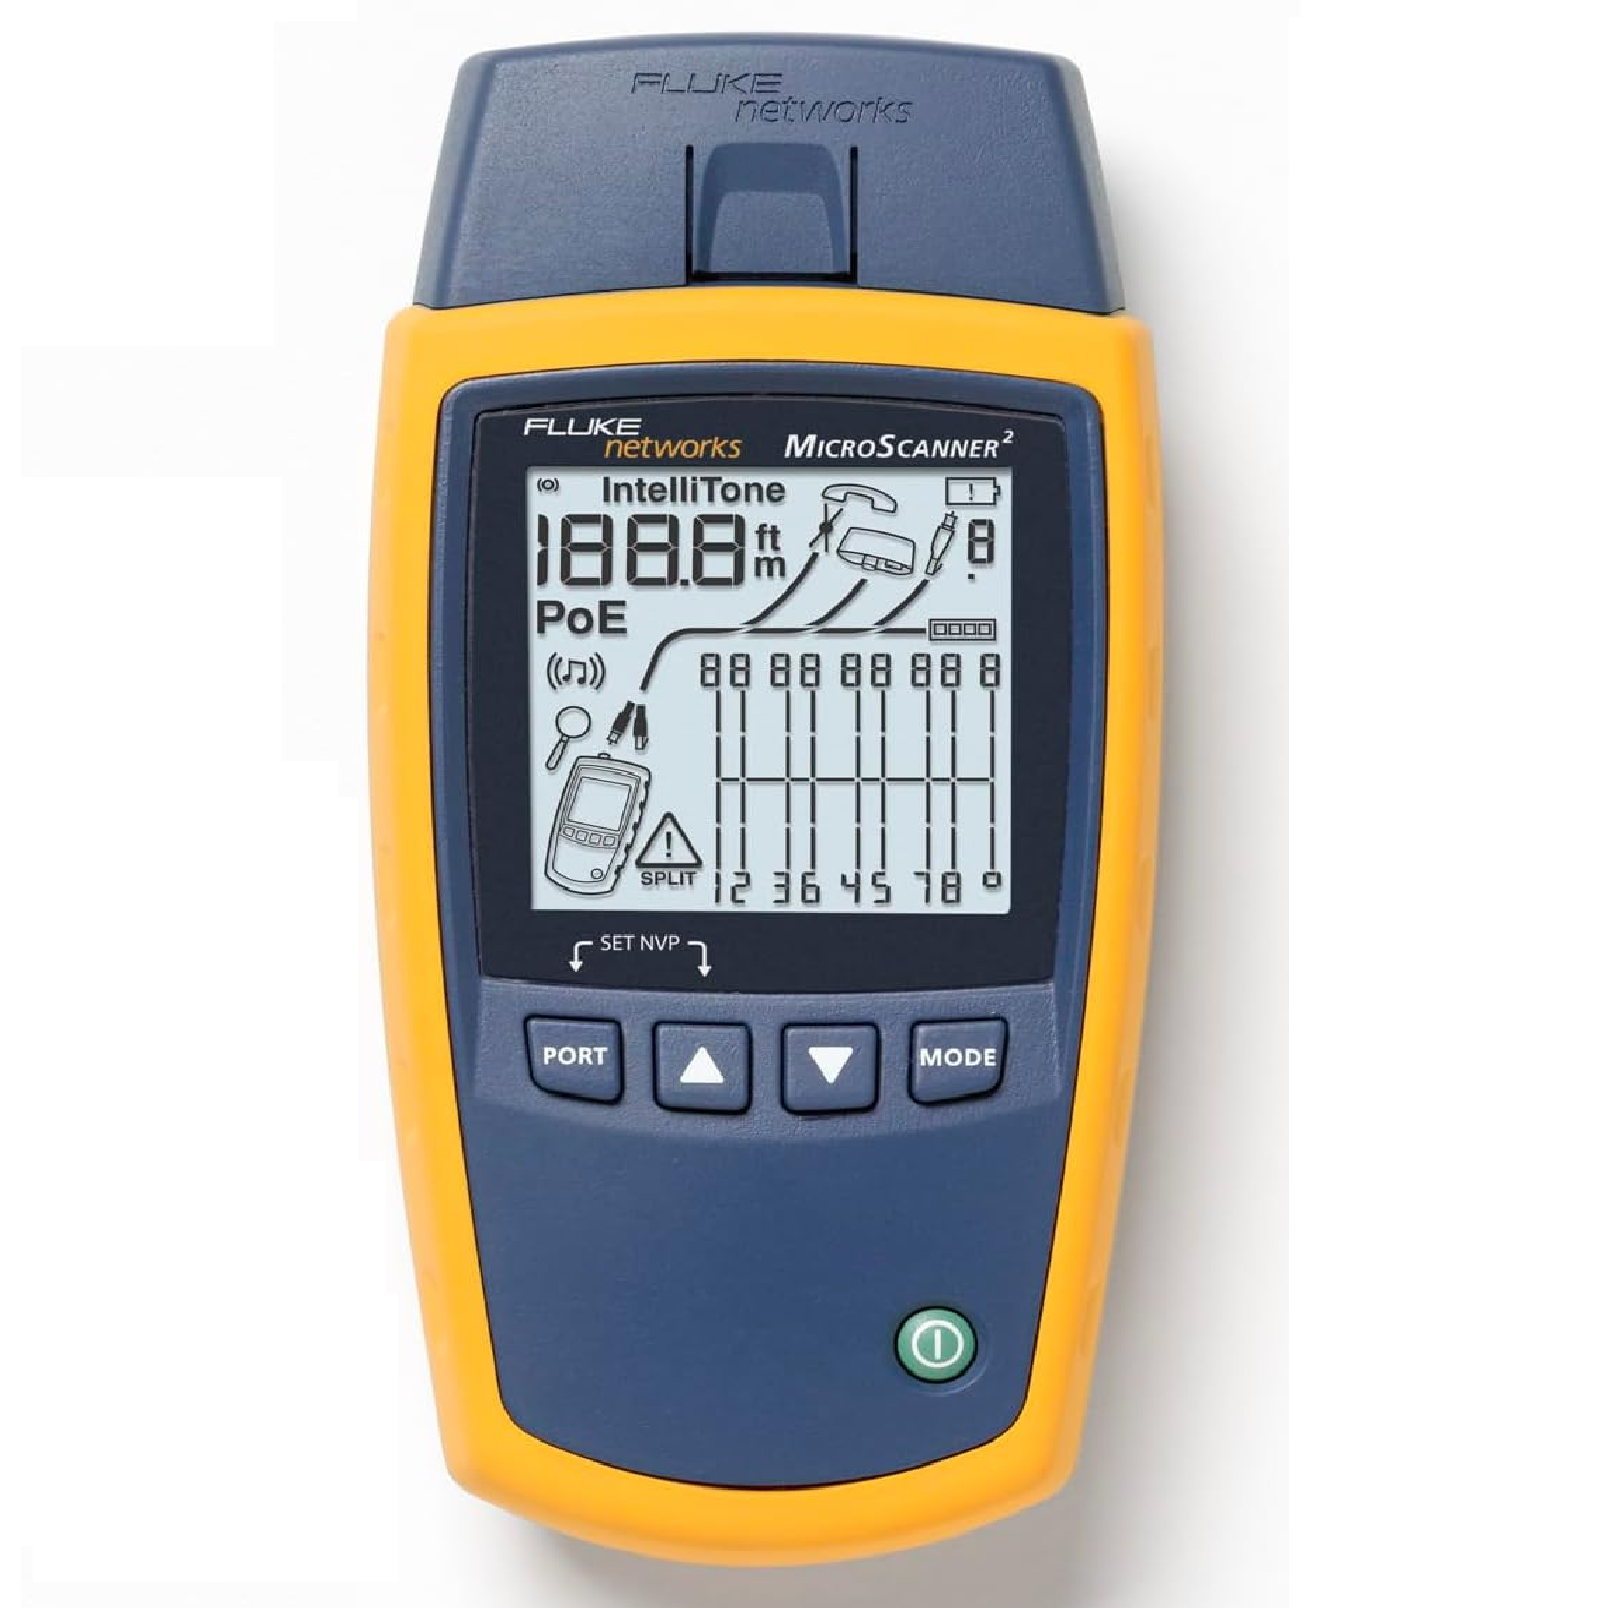 FLUKE NETWORK MS2-100 MicroScanner 2 Copper Cable Verifier With Built-In INTELLITONE TONING